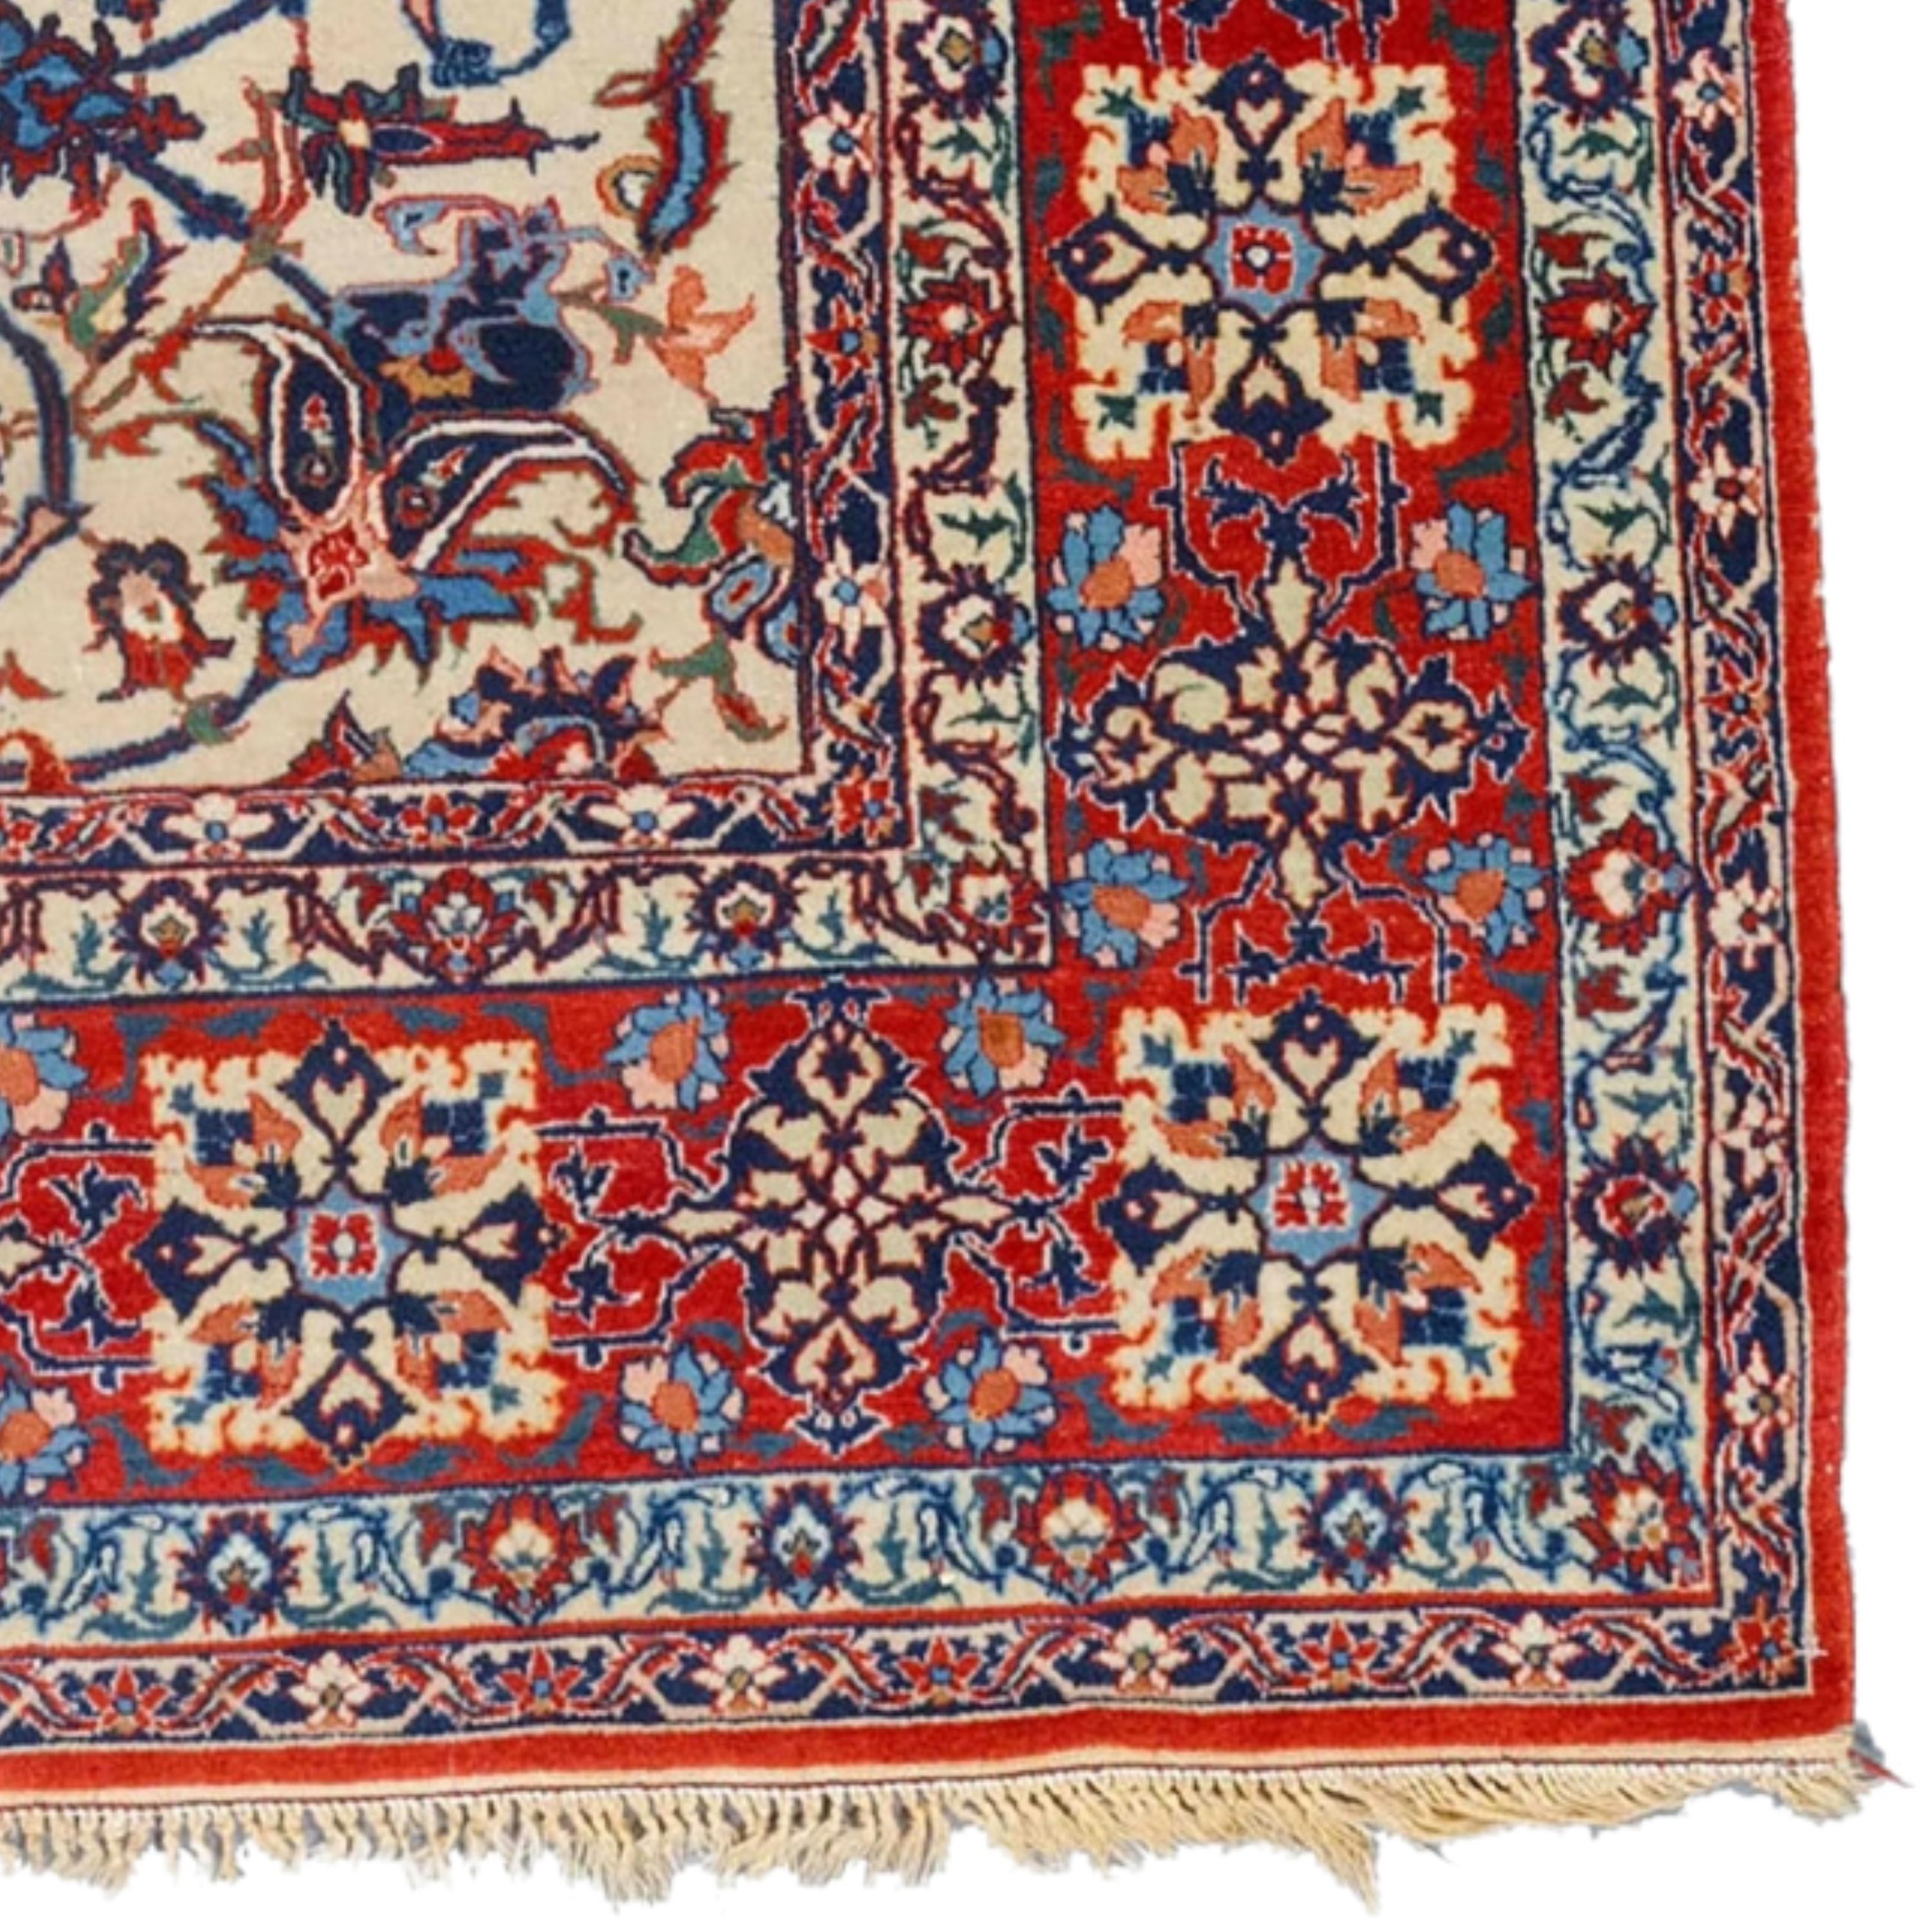 Wool Antique Esfahan Rug - Late of 19th Century Prayer Esfahan Rug, Antique Rug For Sale